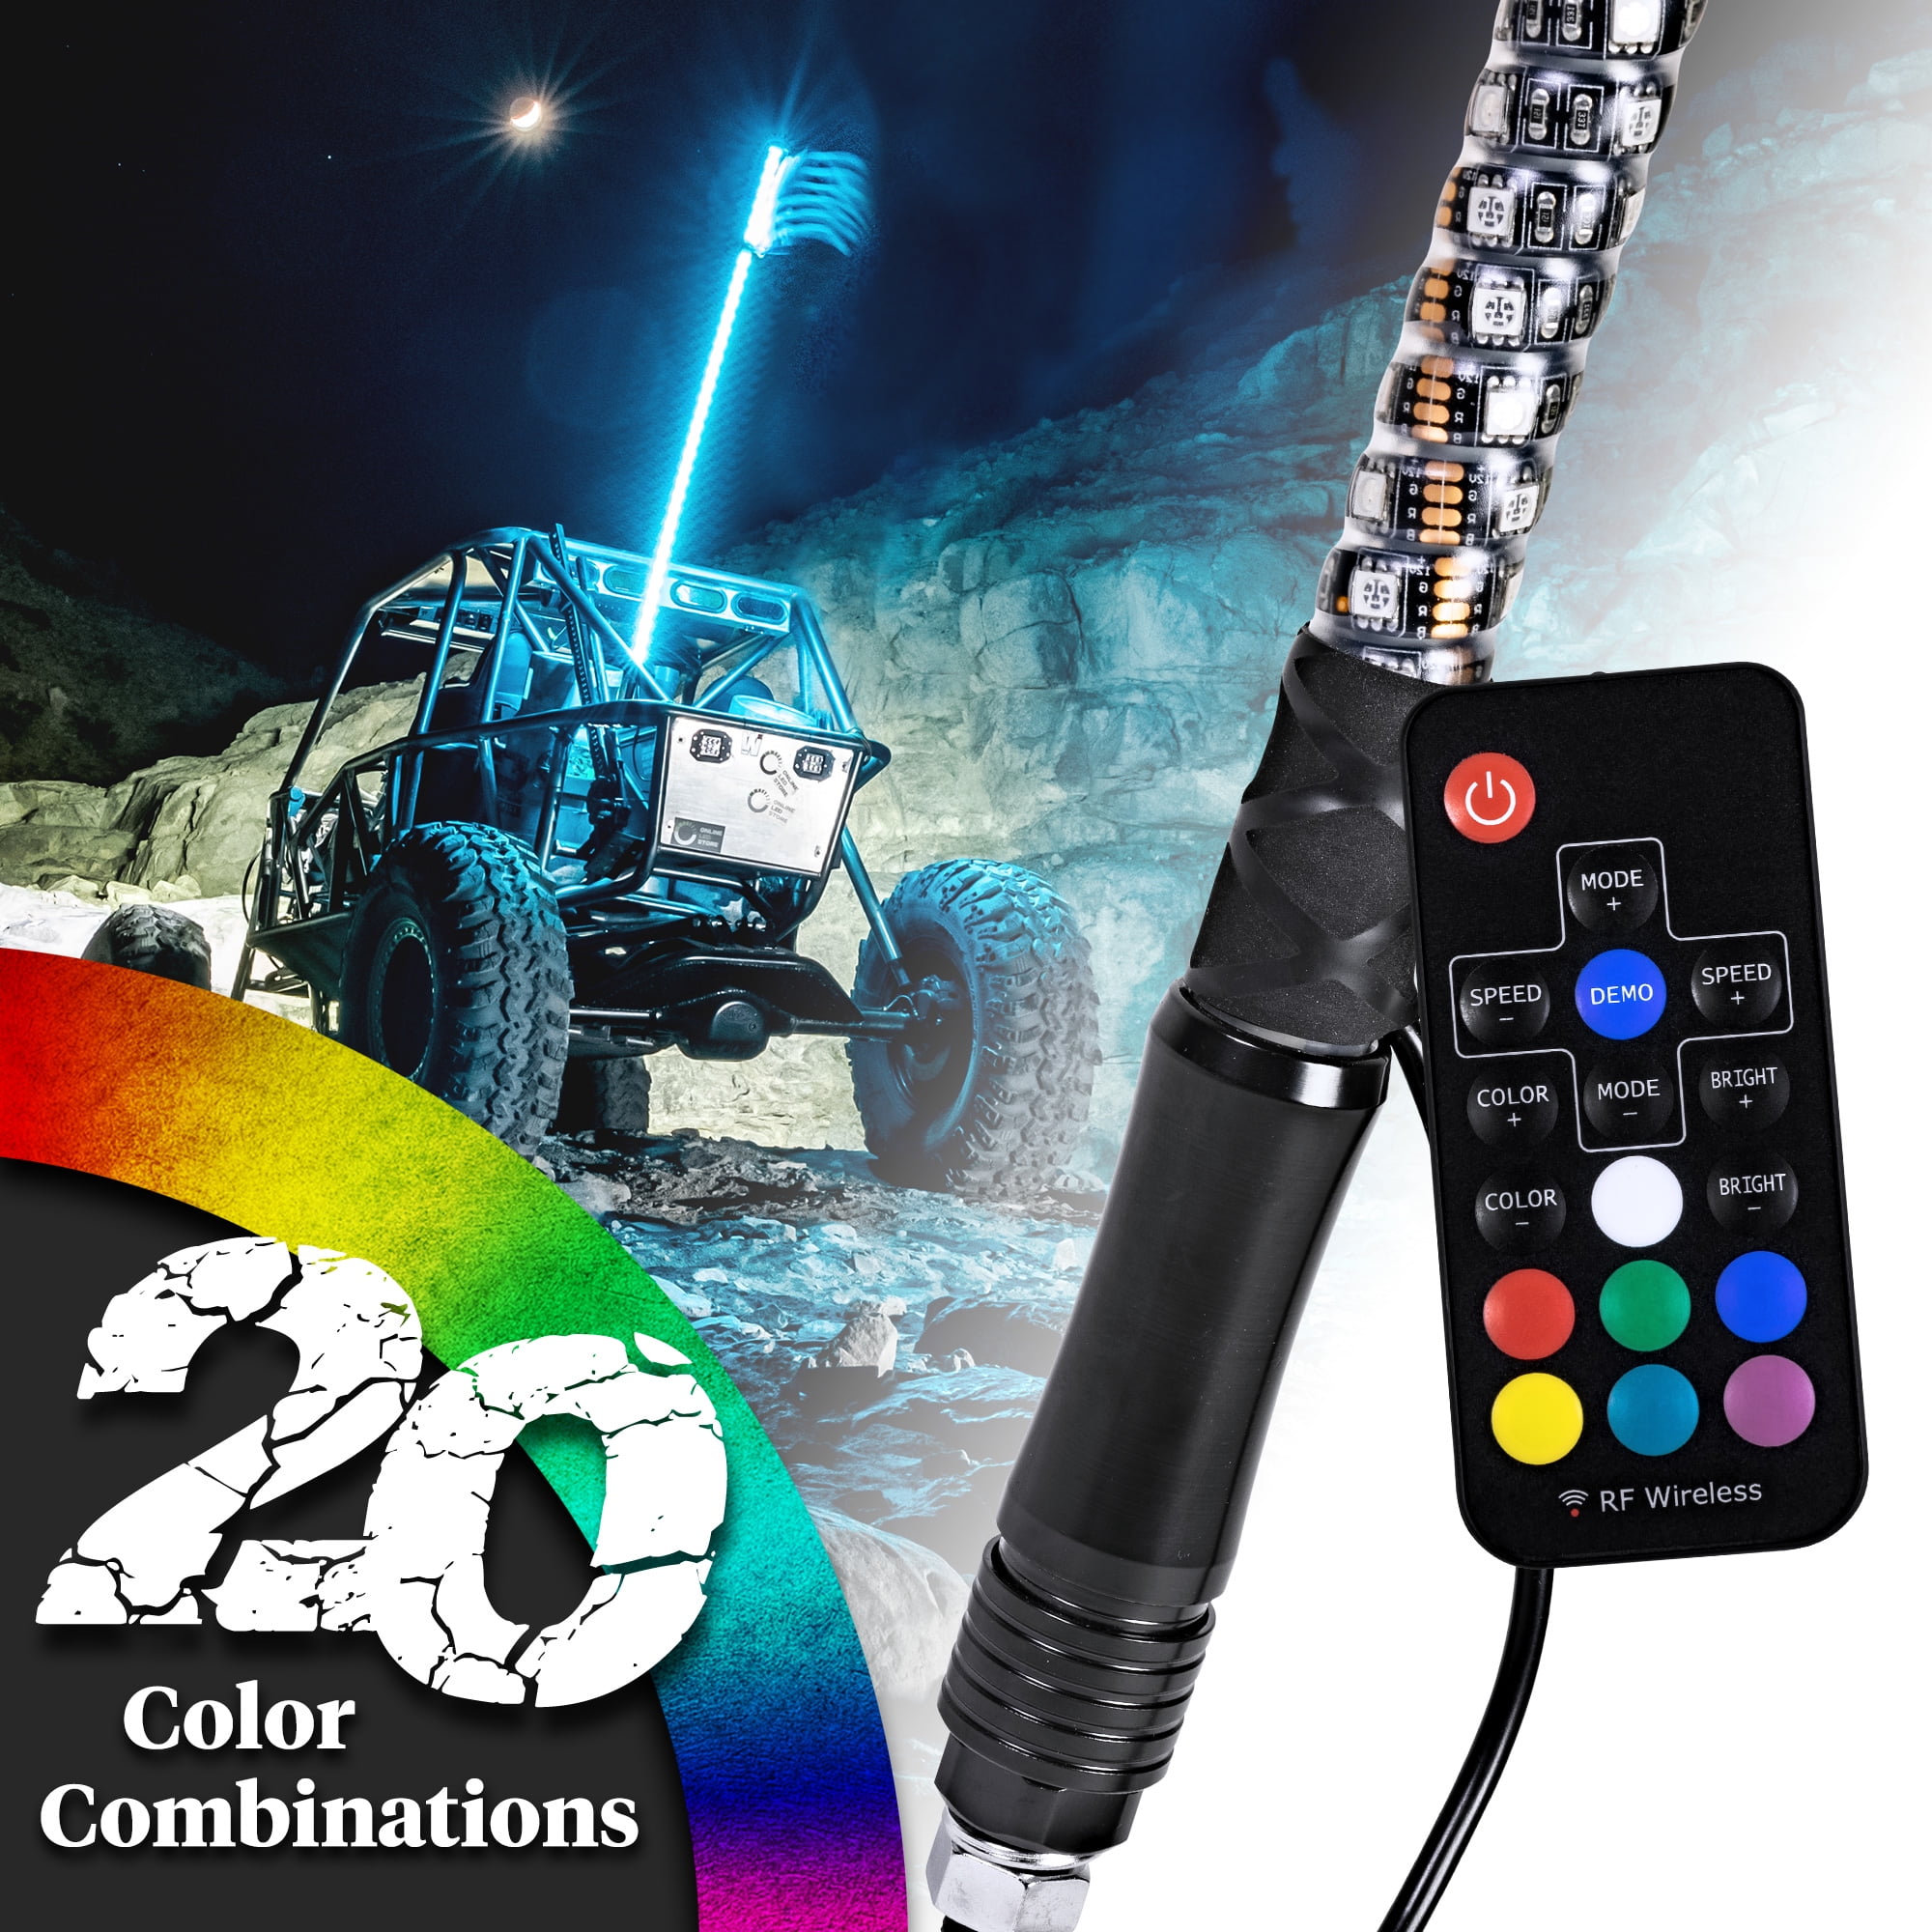 Two Whip OMUOFFROAD 5FT LED Whip Lights 360° Twisted Antenna Dream Wrapped Dancing Whips For Polaris RZR ATV Antenna Whip UTV Quad Sand Dune Buggy Flag Poles For Trucks w/Remote Control 